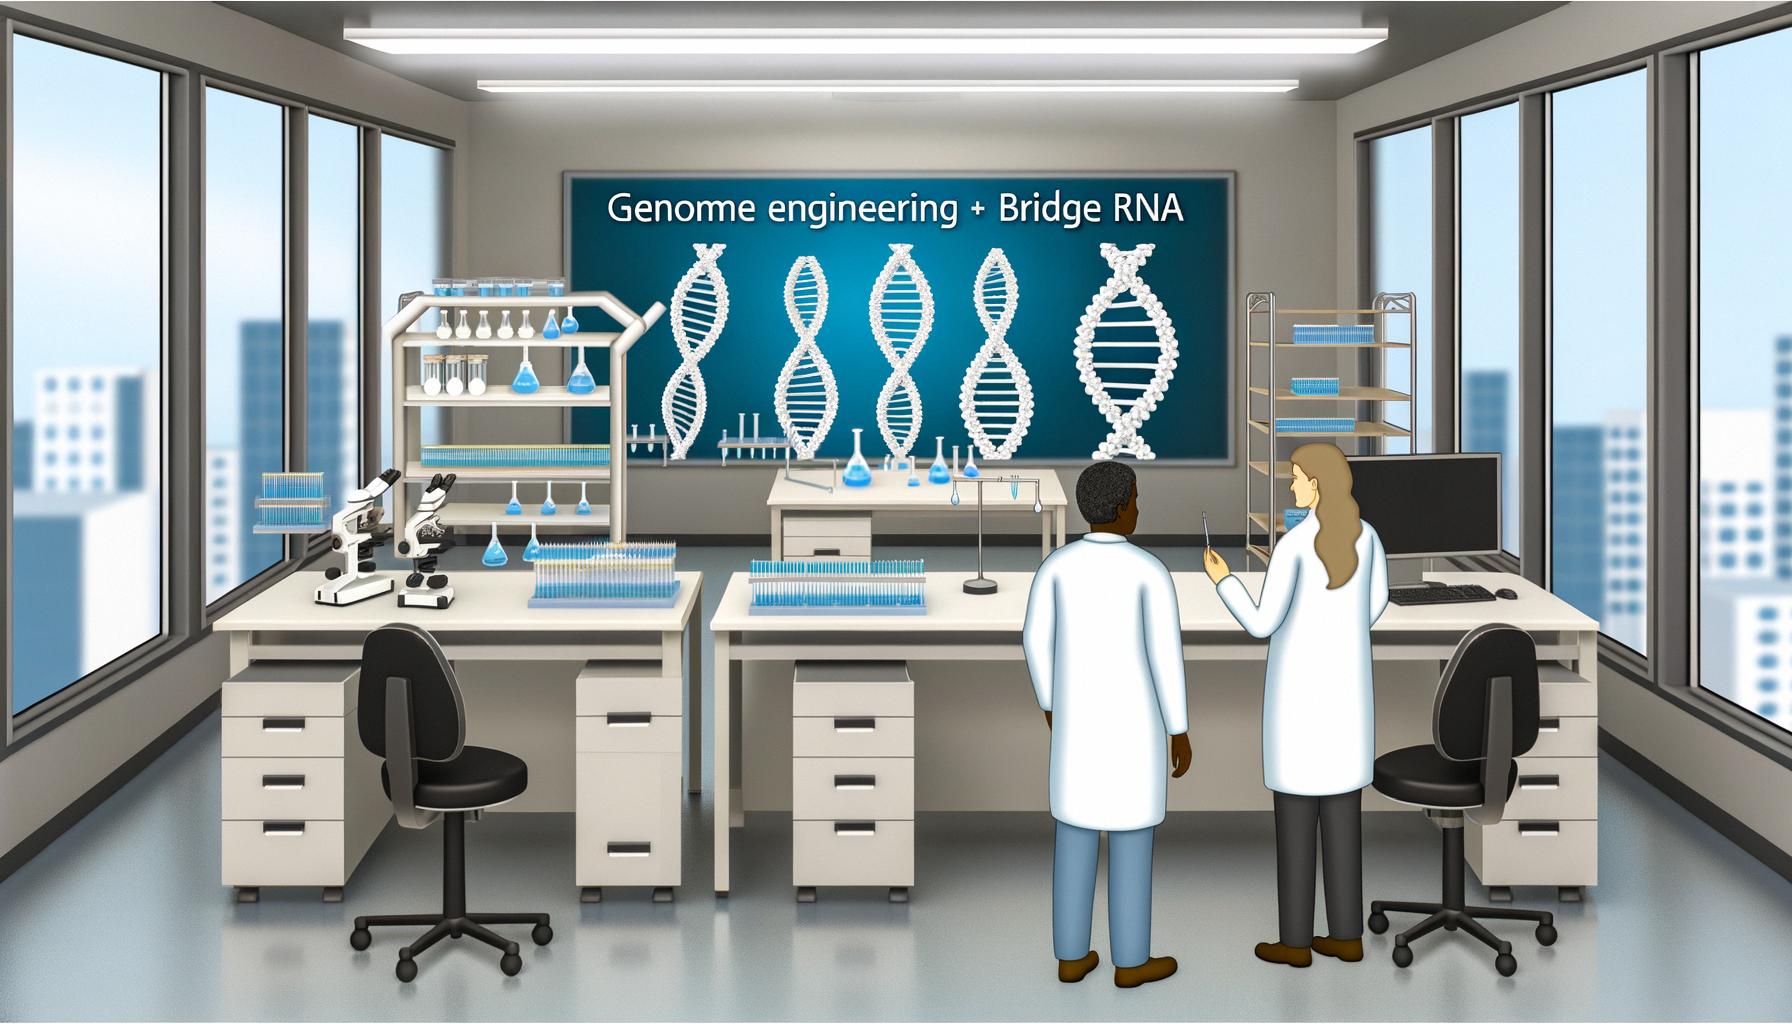 Bridge RNA allows for seamless, large-scale genomic modifications.